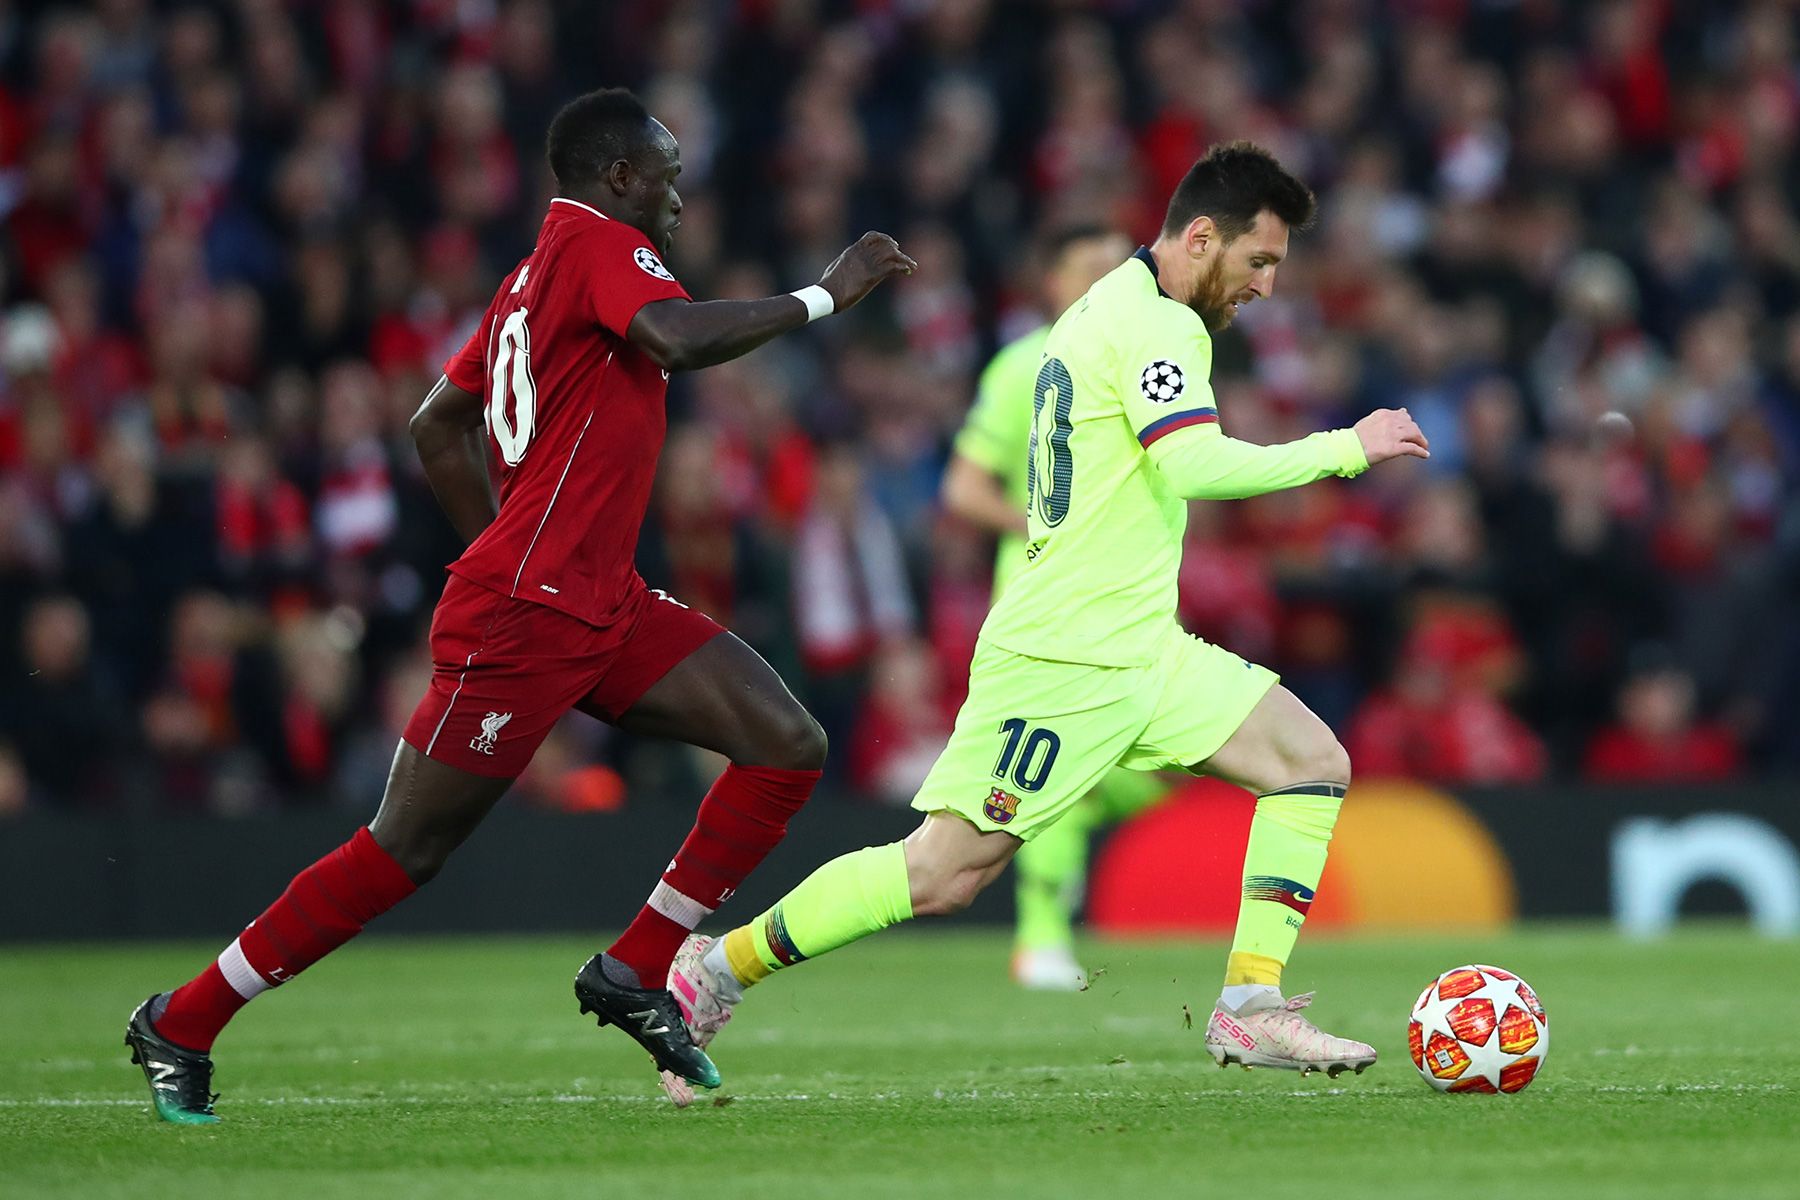 Mané and Messi in the semifinals of the Champions